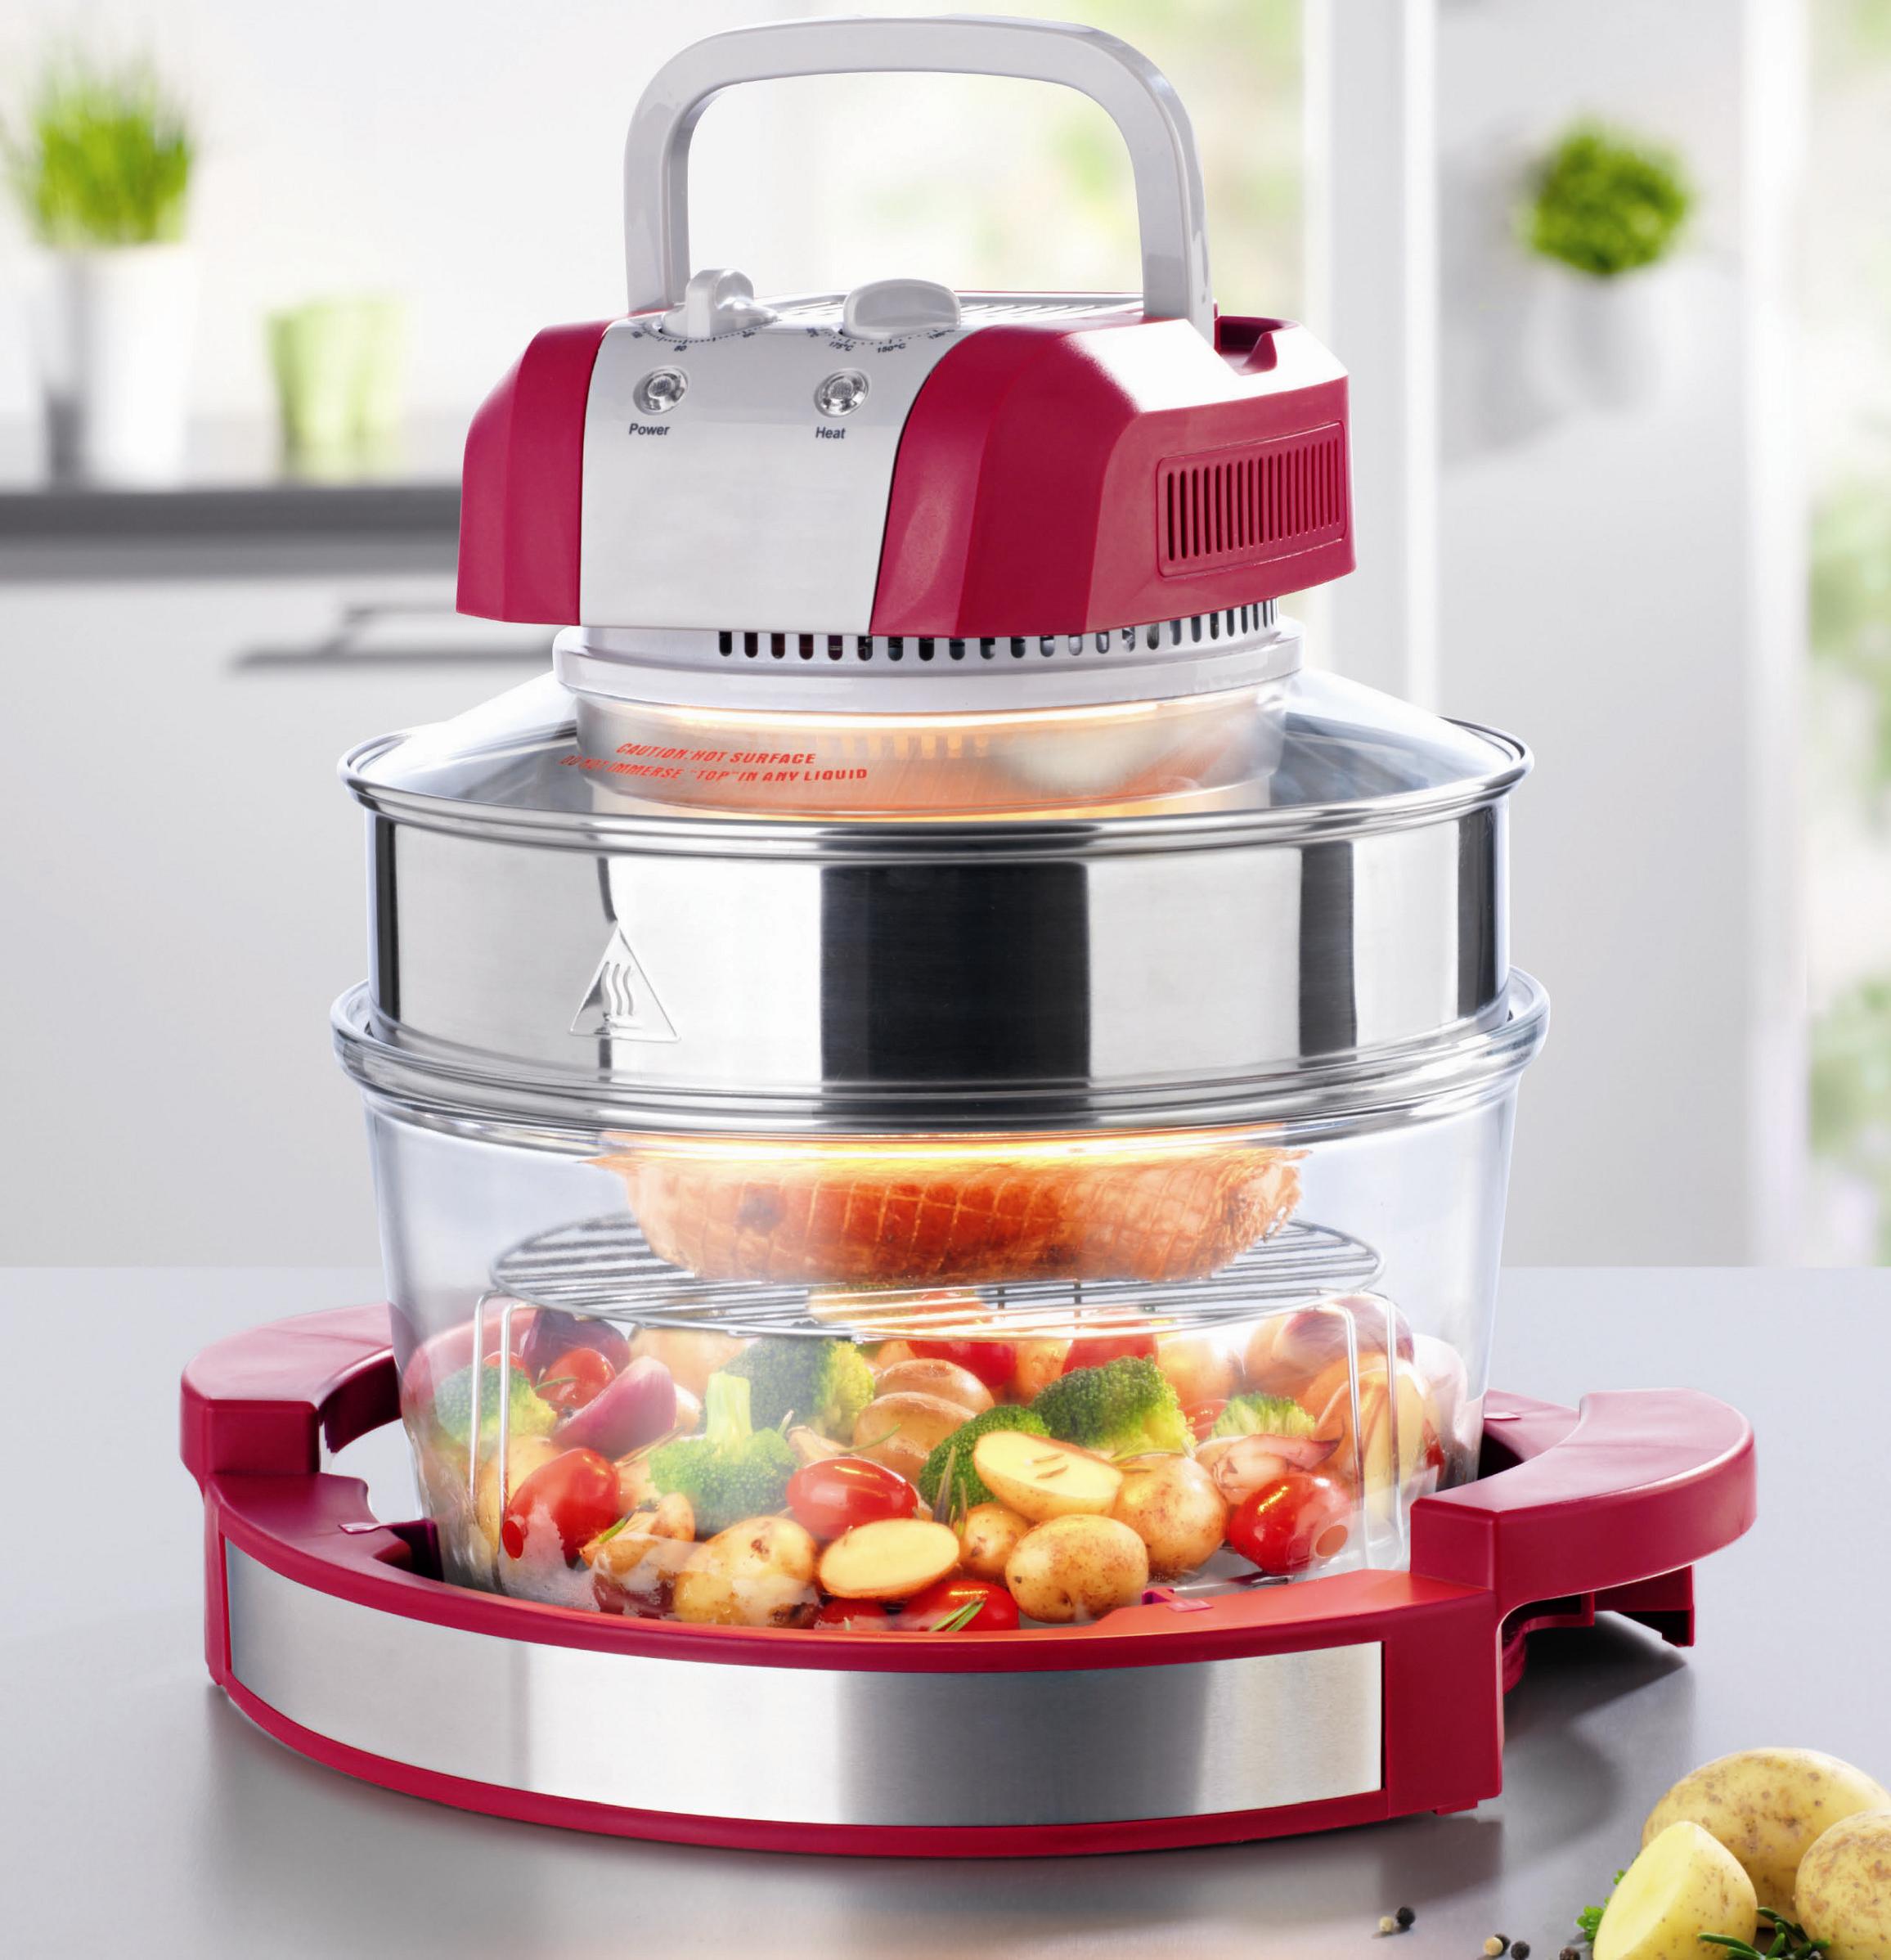 1450W 17L Multifunctional Halogen Oven for healthy cooking,no flame, no smoke, no radiation, oil and fat free.